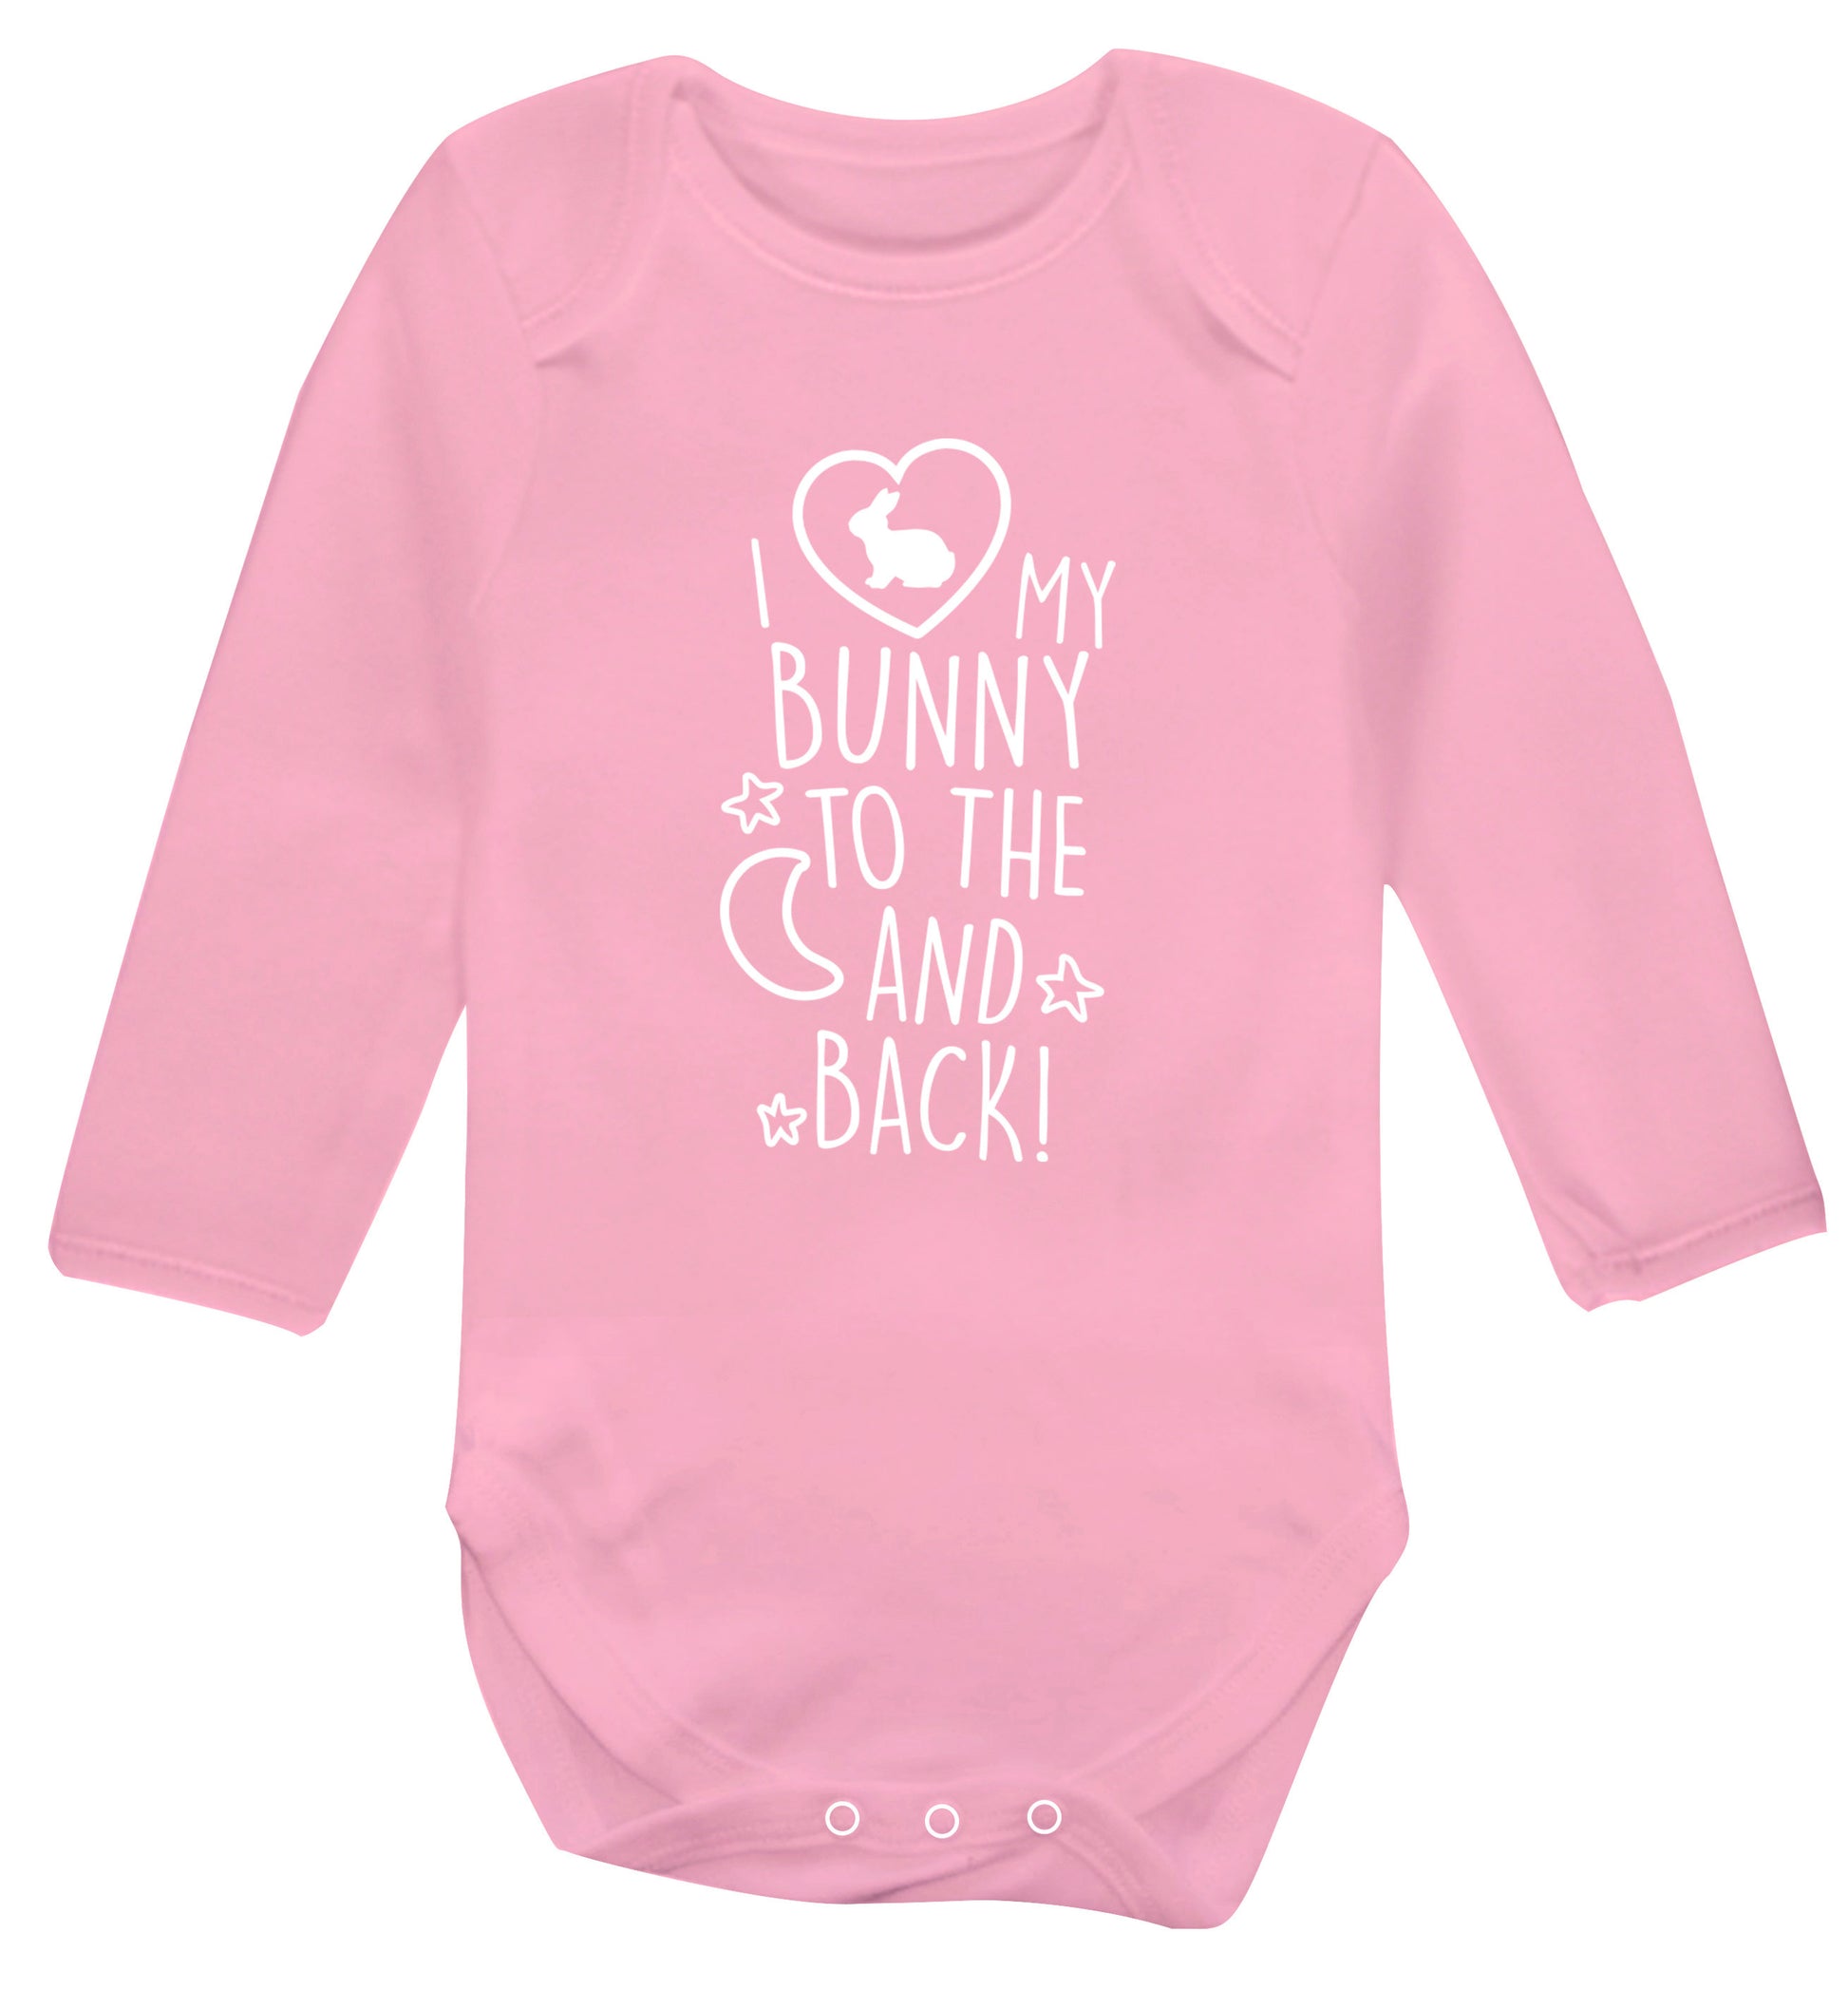 I love my bunny to the moon and back Baby Vest long sleeved pale pink 6-12 months